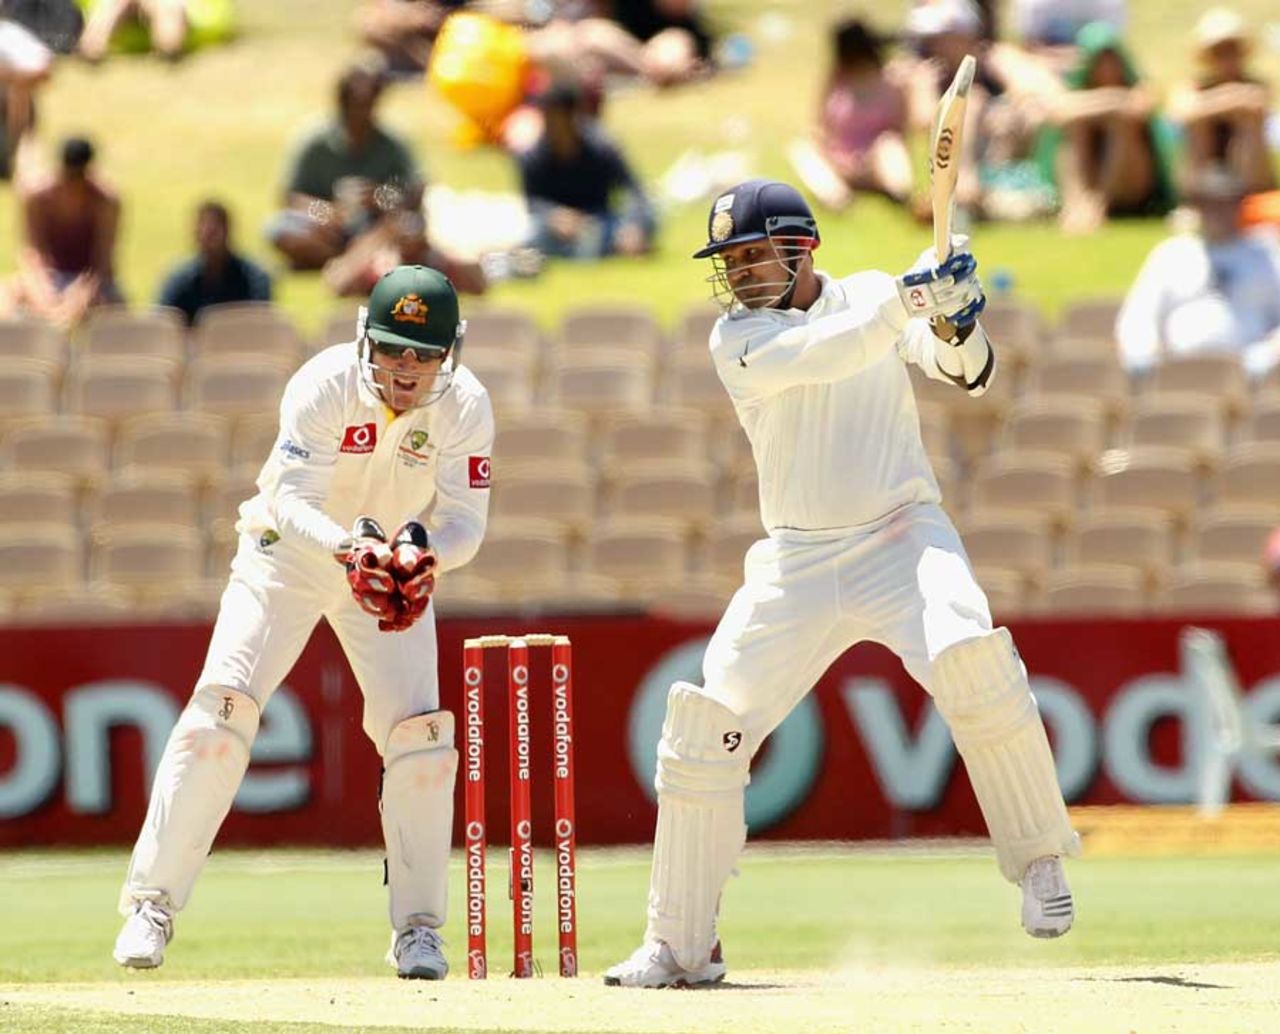 Virender Sehwag cracks one through the off side, Australia v India, 4th Test, Adelaide, 4th day, January 27, 2012